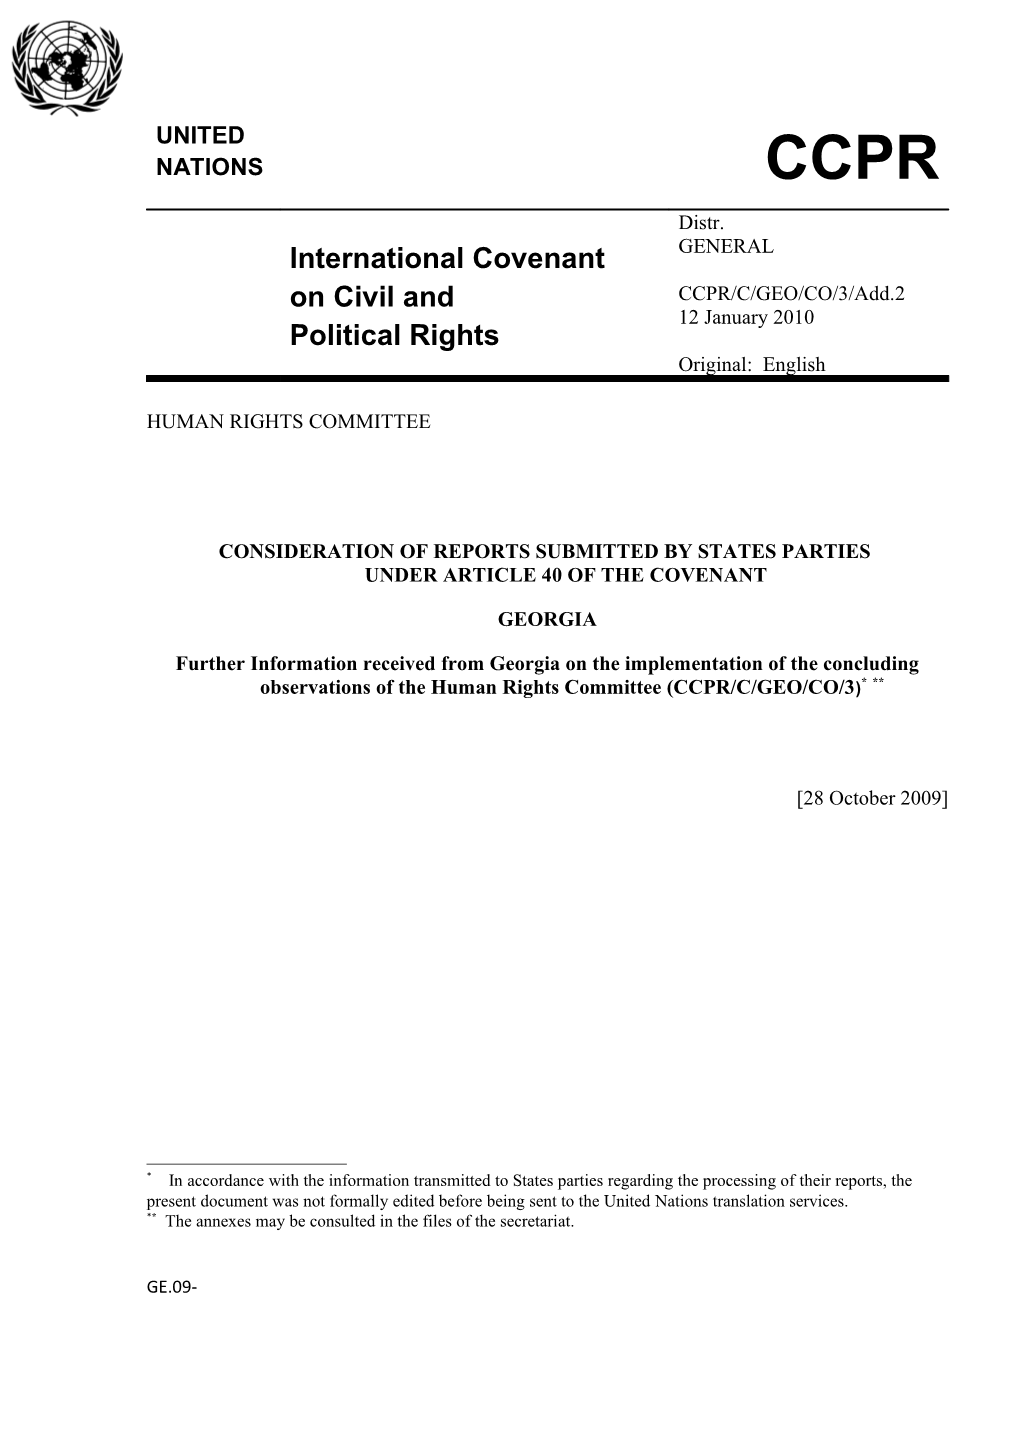 Follow up Information to the United Nations Human Rights Committee by the Government Of